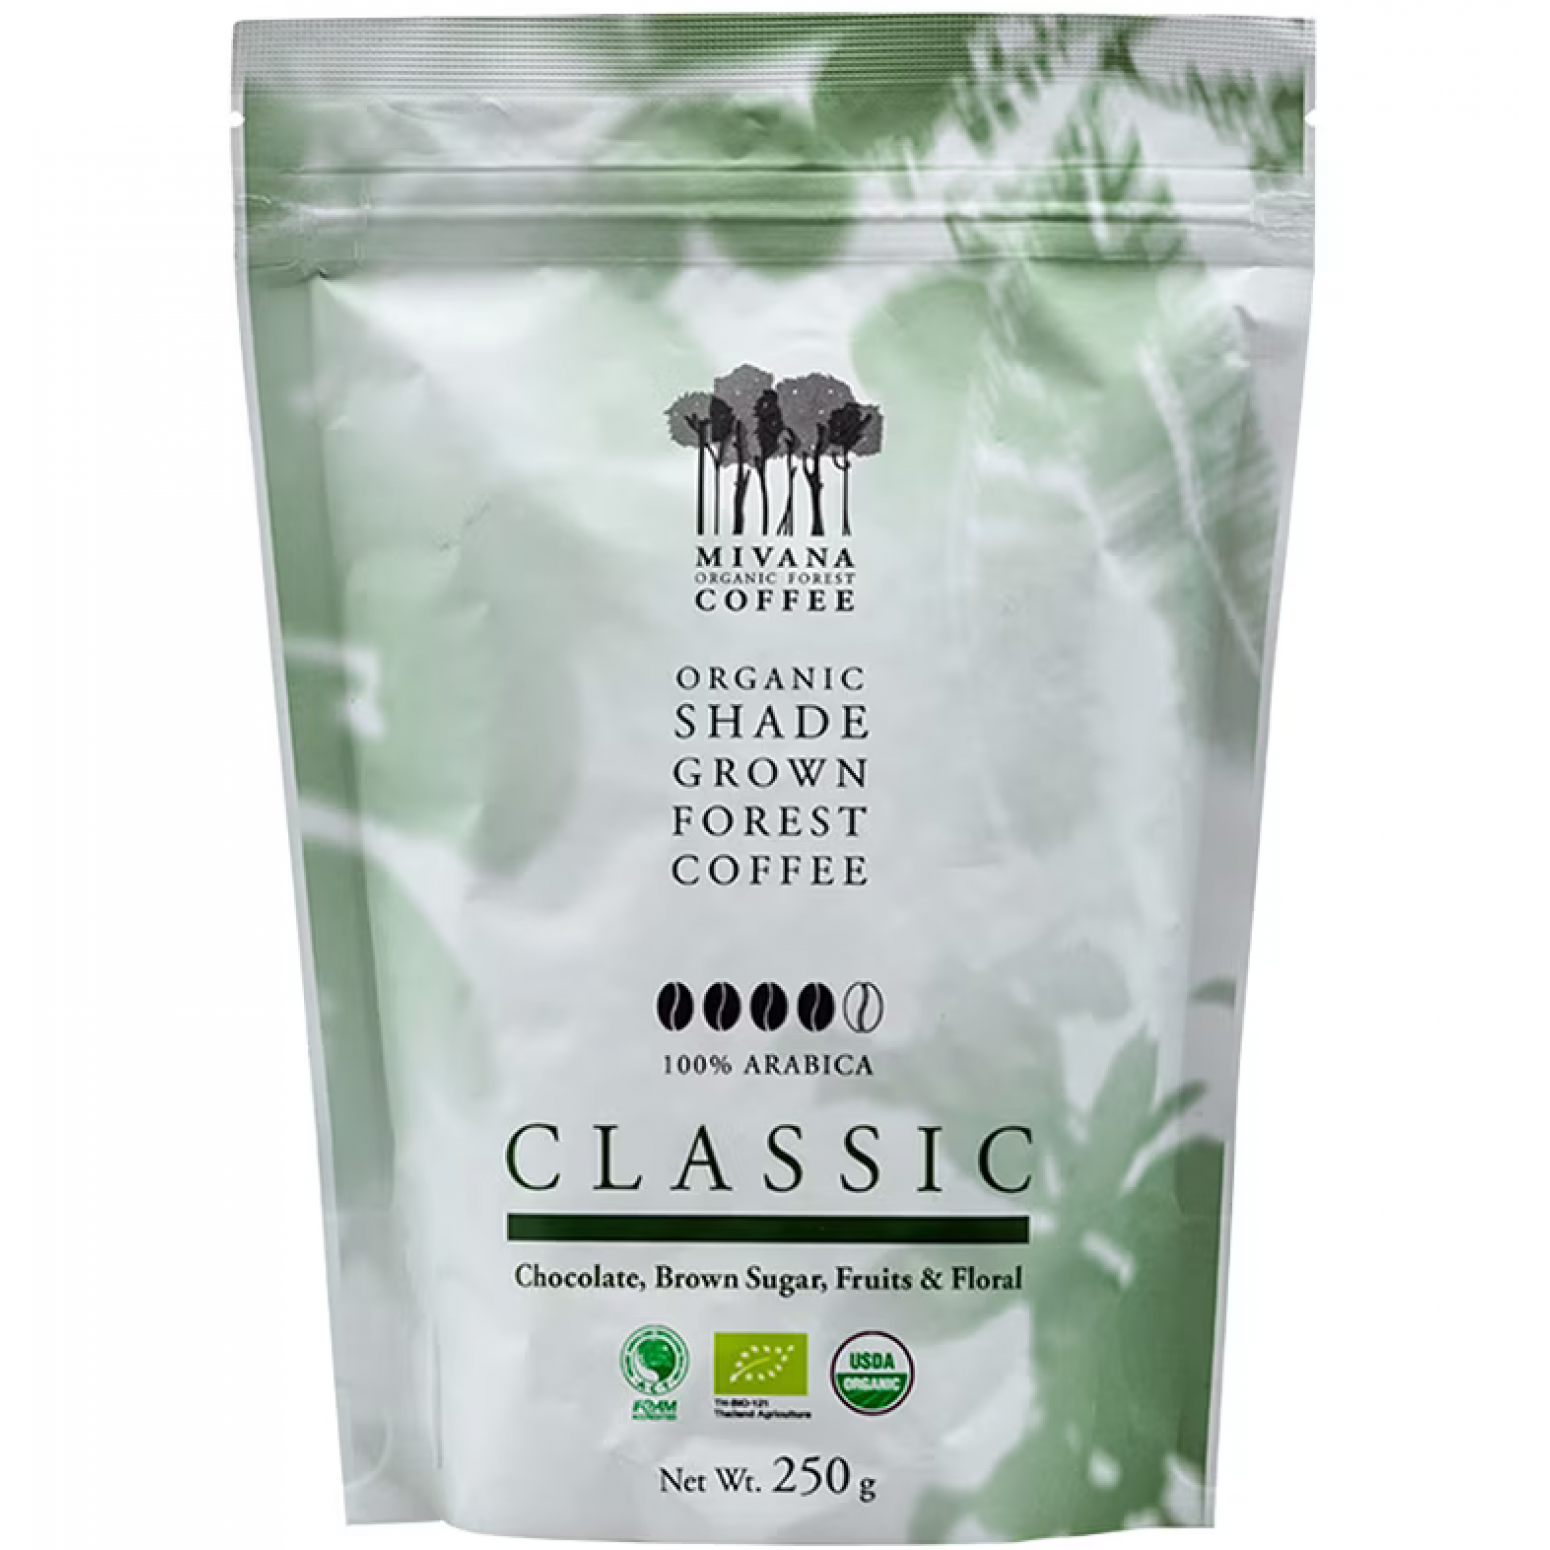 Mivana Roasted And Grinded Coffee Beans Classic Organic Arabica 250g.